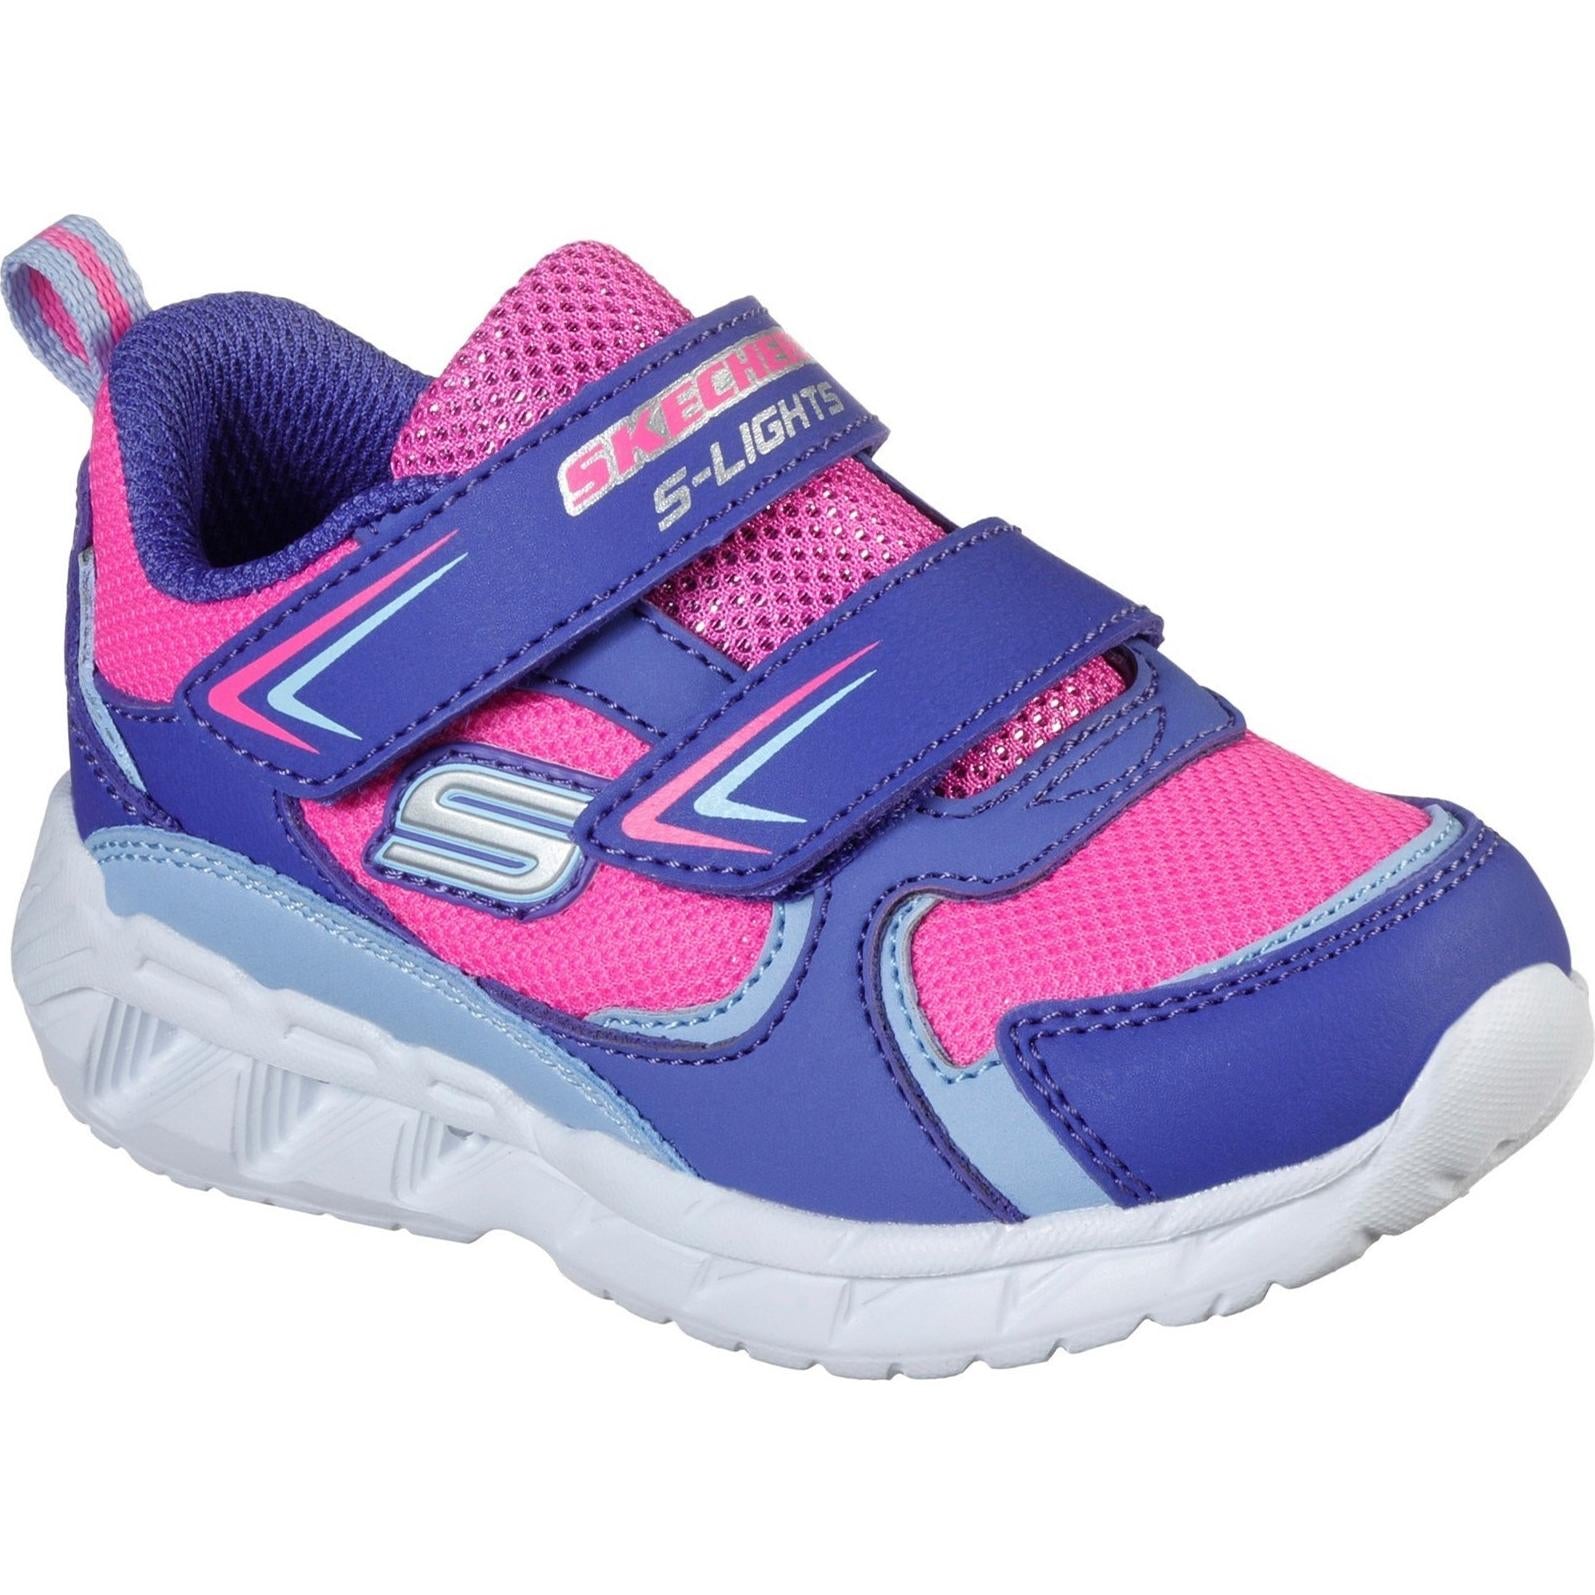 Skechers S Lights Magna-Lights Goal Achiever Touch Fastening Trainer